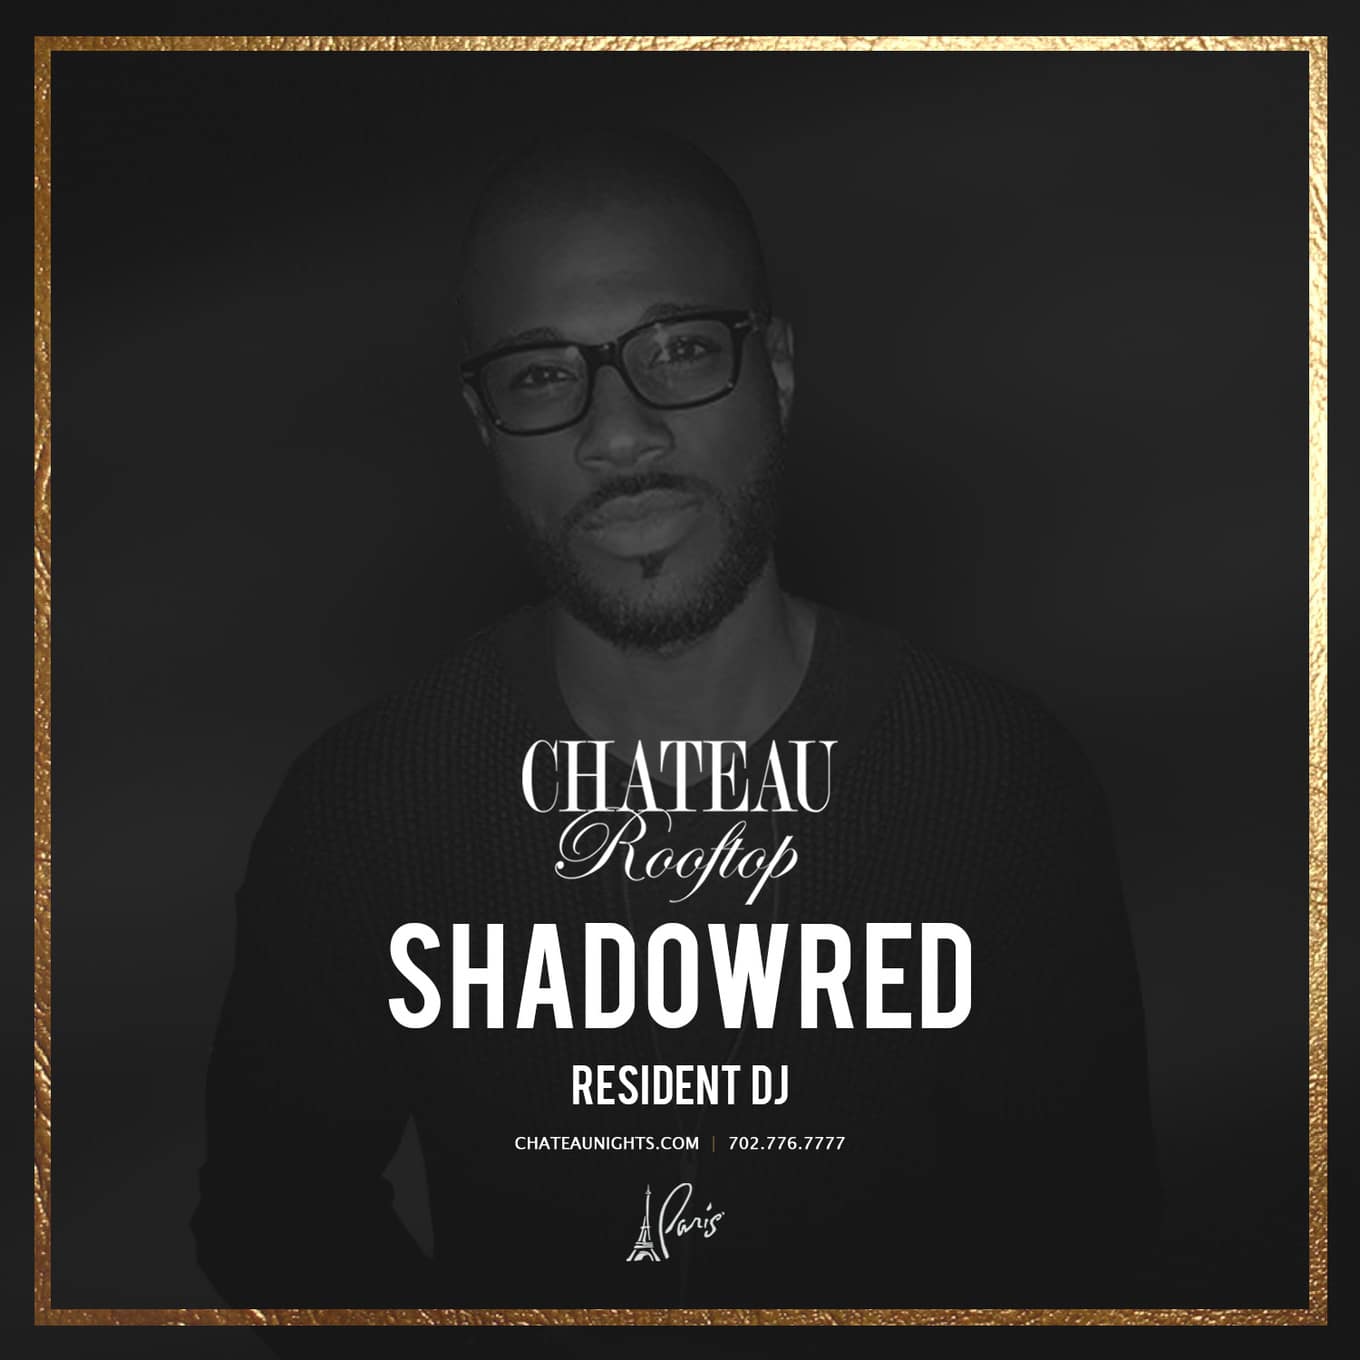 ShadowRed at Chateau